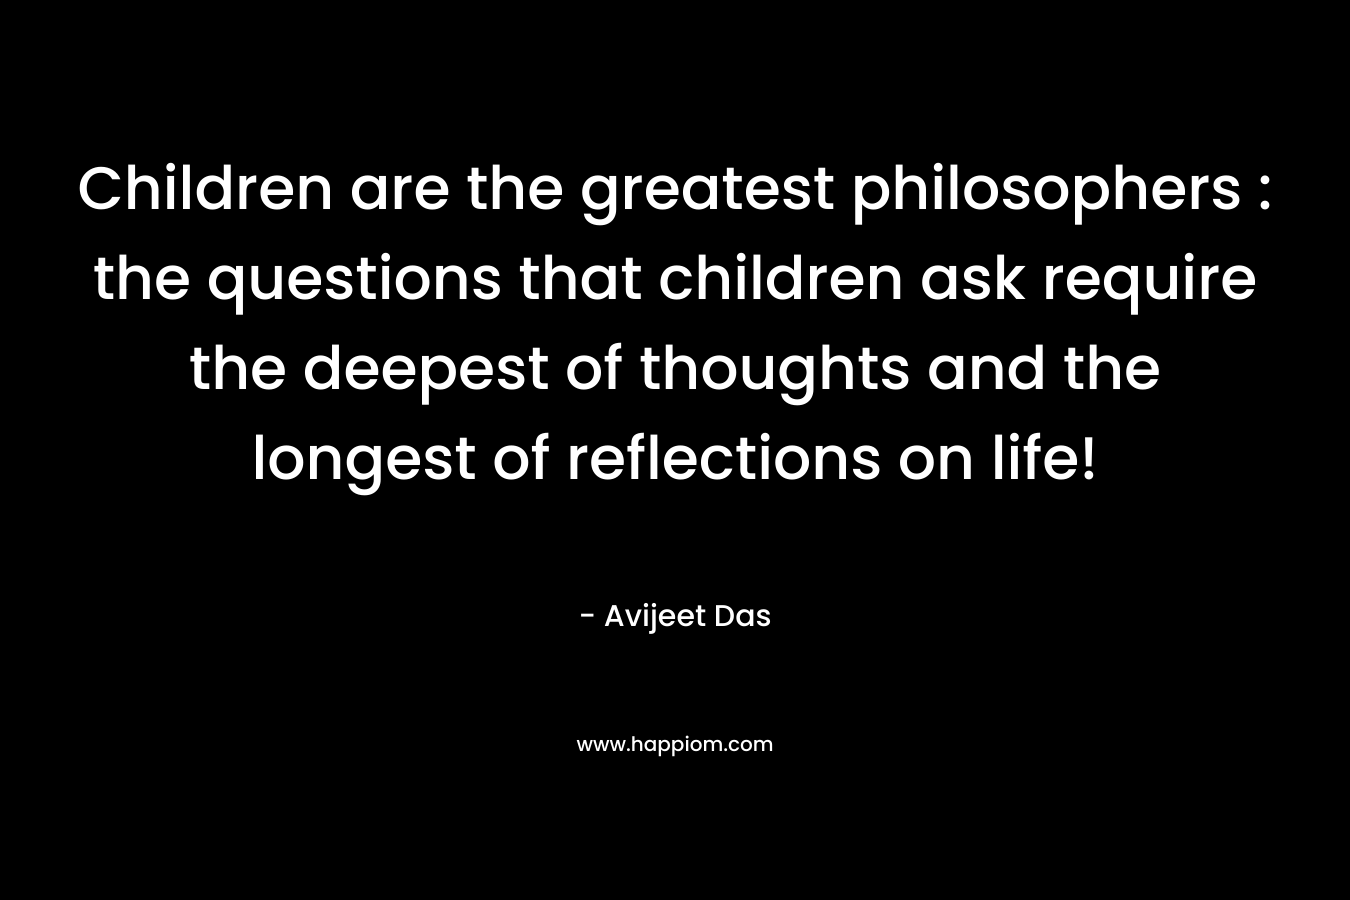 Children are the greatest philosophers : the questions that children ask require the deepest of thoughts and the longest of reflections on life! – Avijeet Das